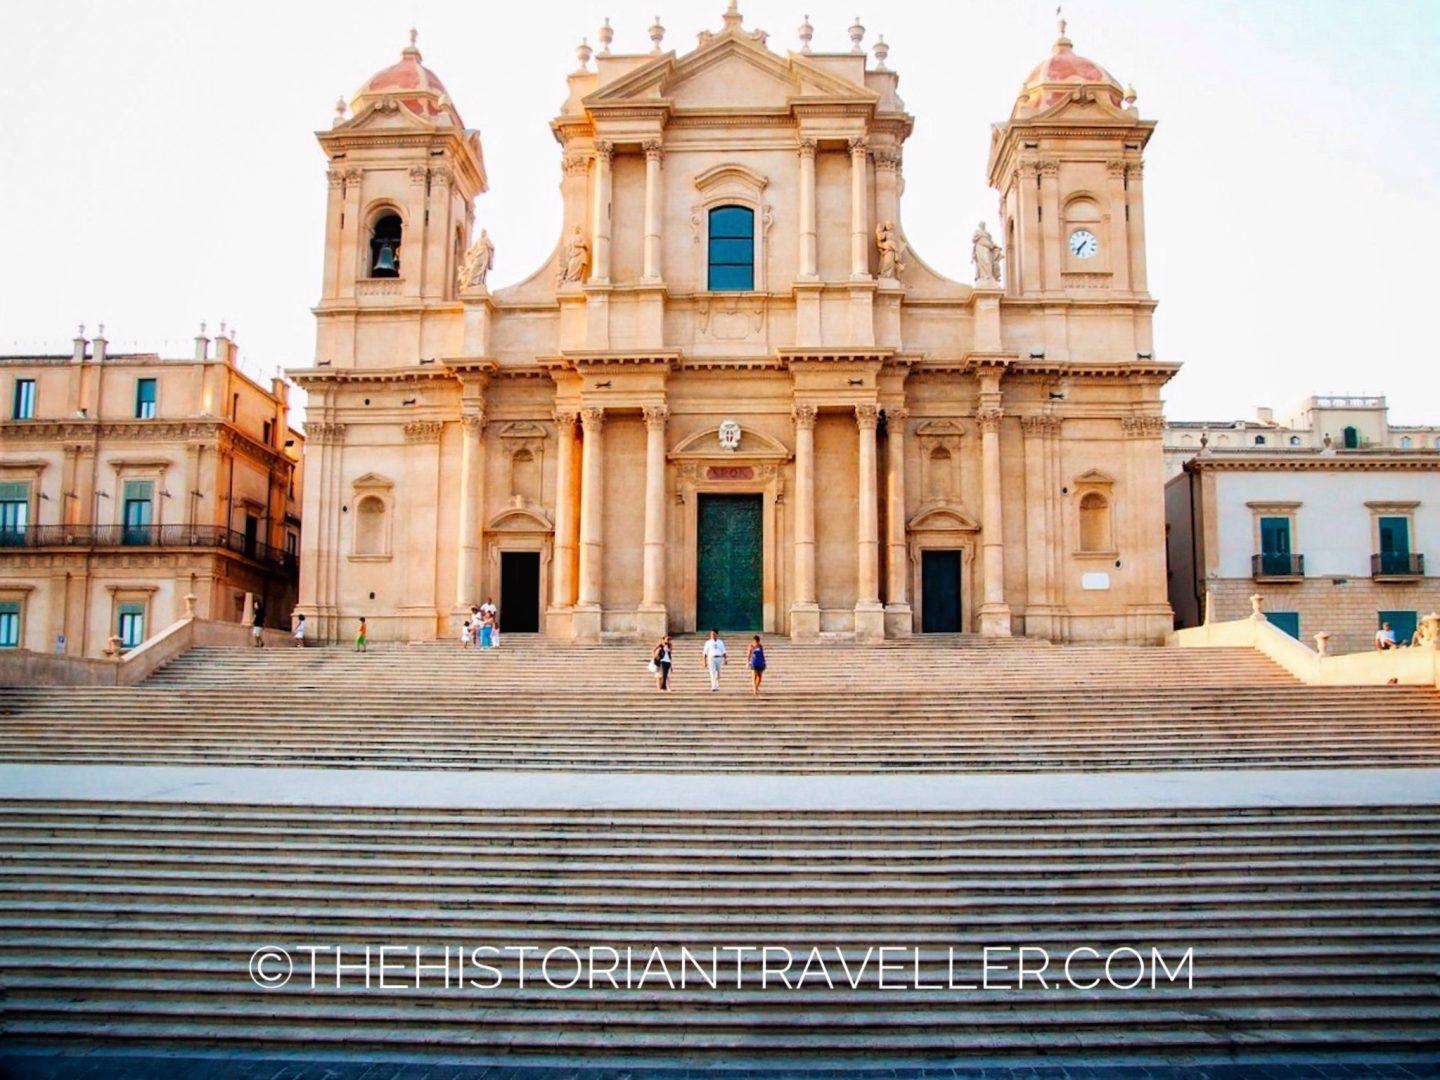 East Sicily Itinerary